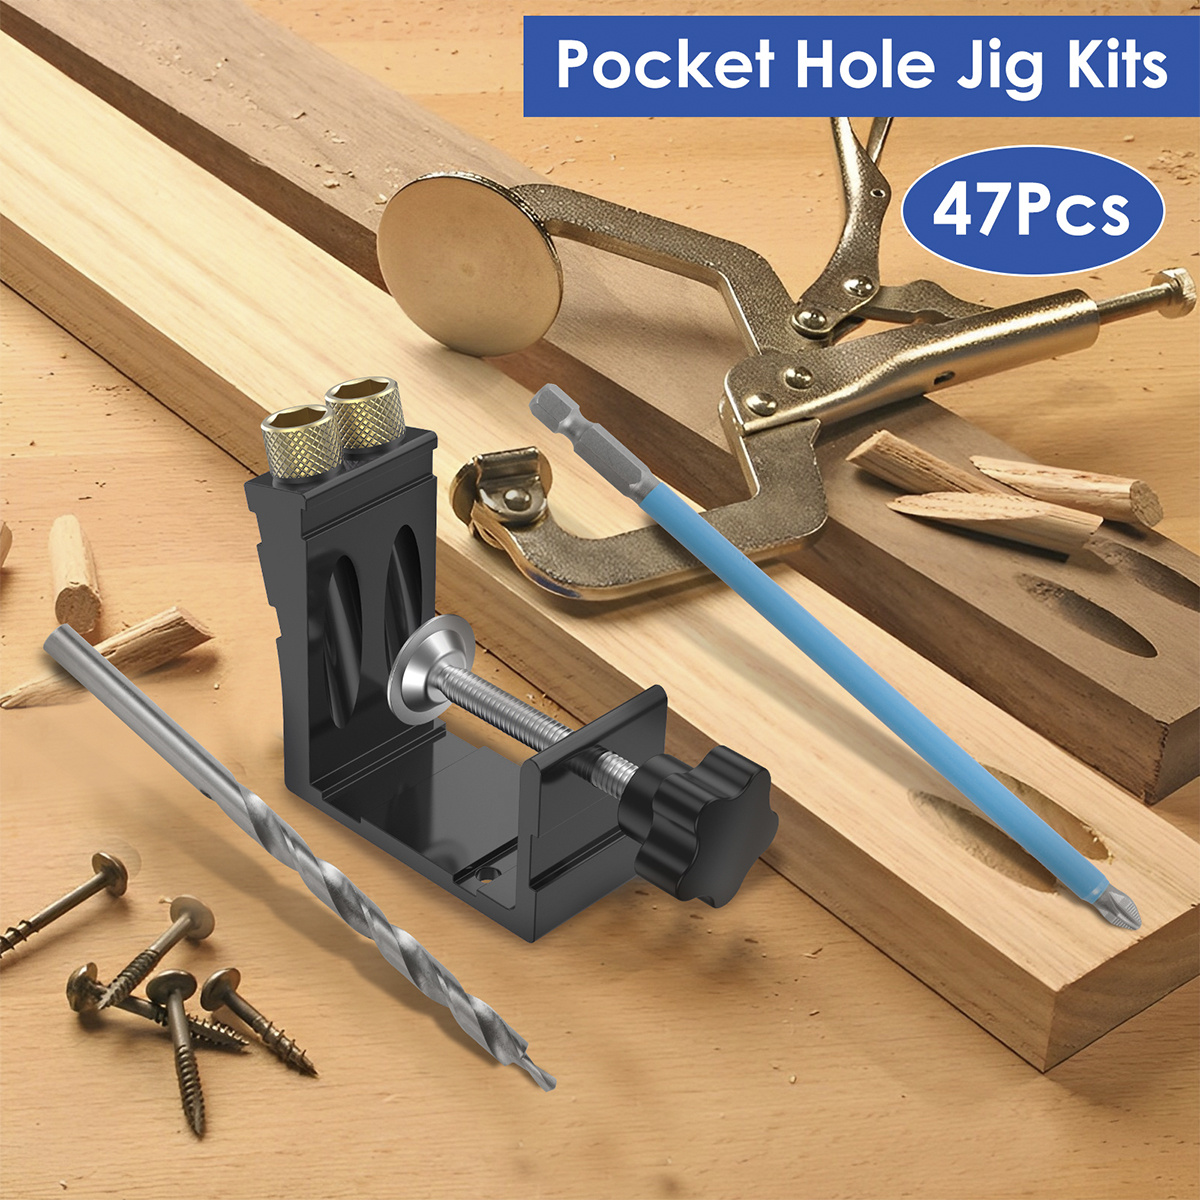 Pocket Hole Jig Drill Guide Master Kit For Carpenter Joinery System  Woodworking from China manufacturer - Farmertec